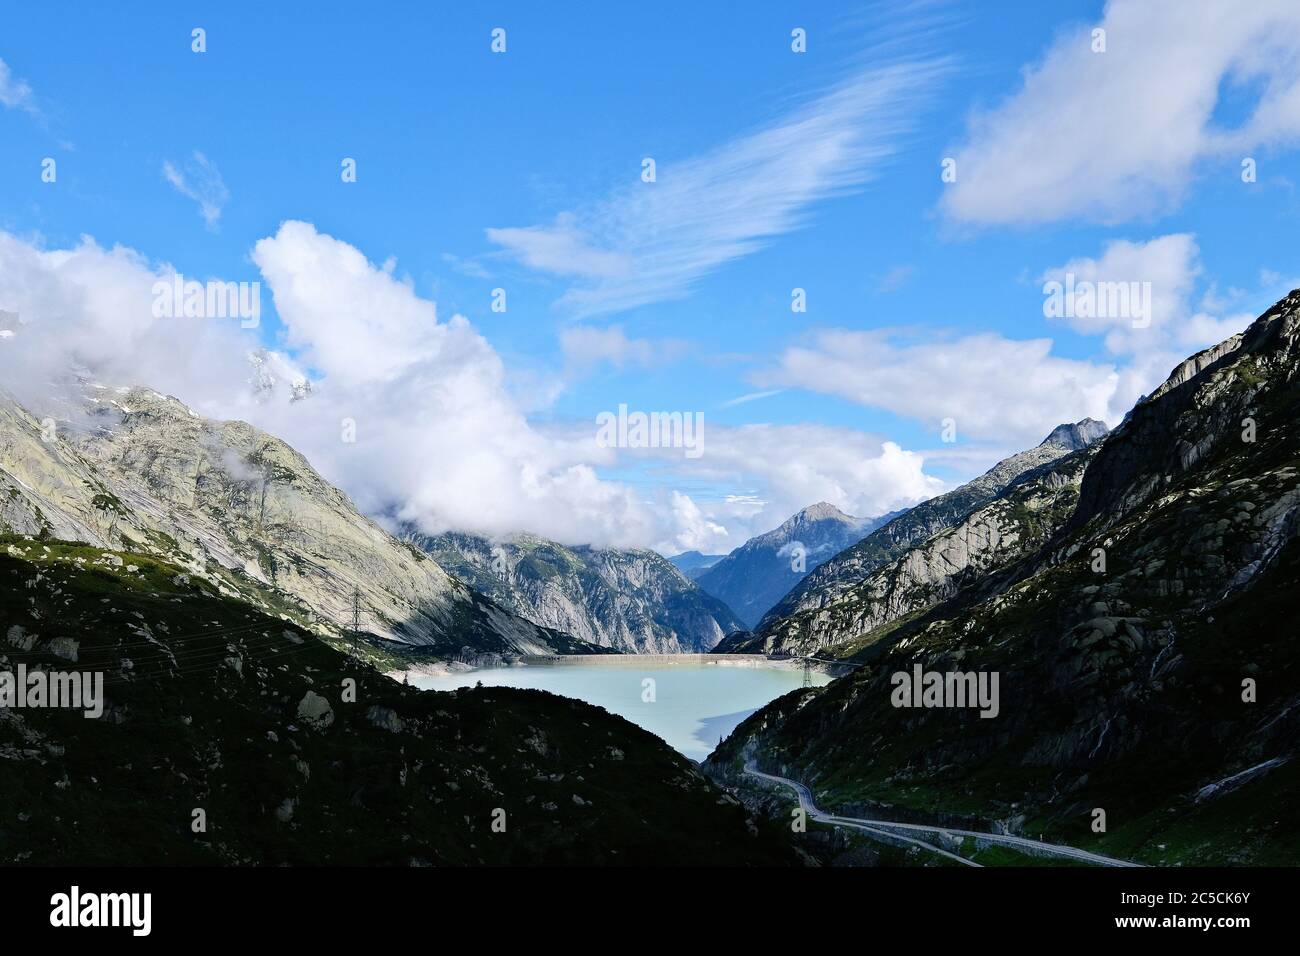 Räterichsbodensee reservoir. A reservoir on the Grimsel Pass in the Swiss Alps connecting the Bernese Oberland with the Upper Valais, Switzerland. Stock Photo